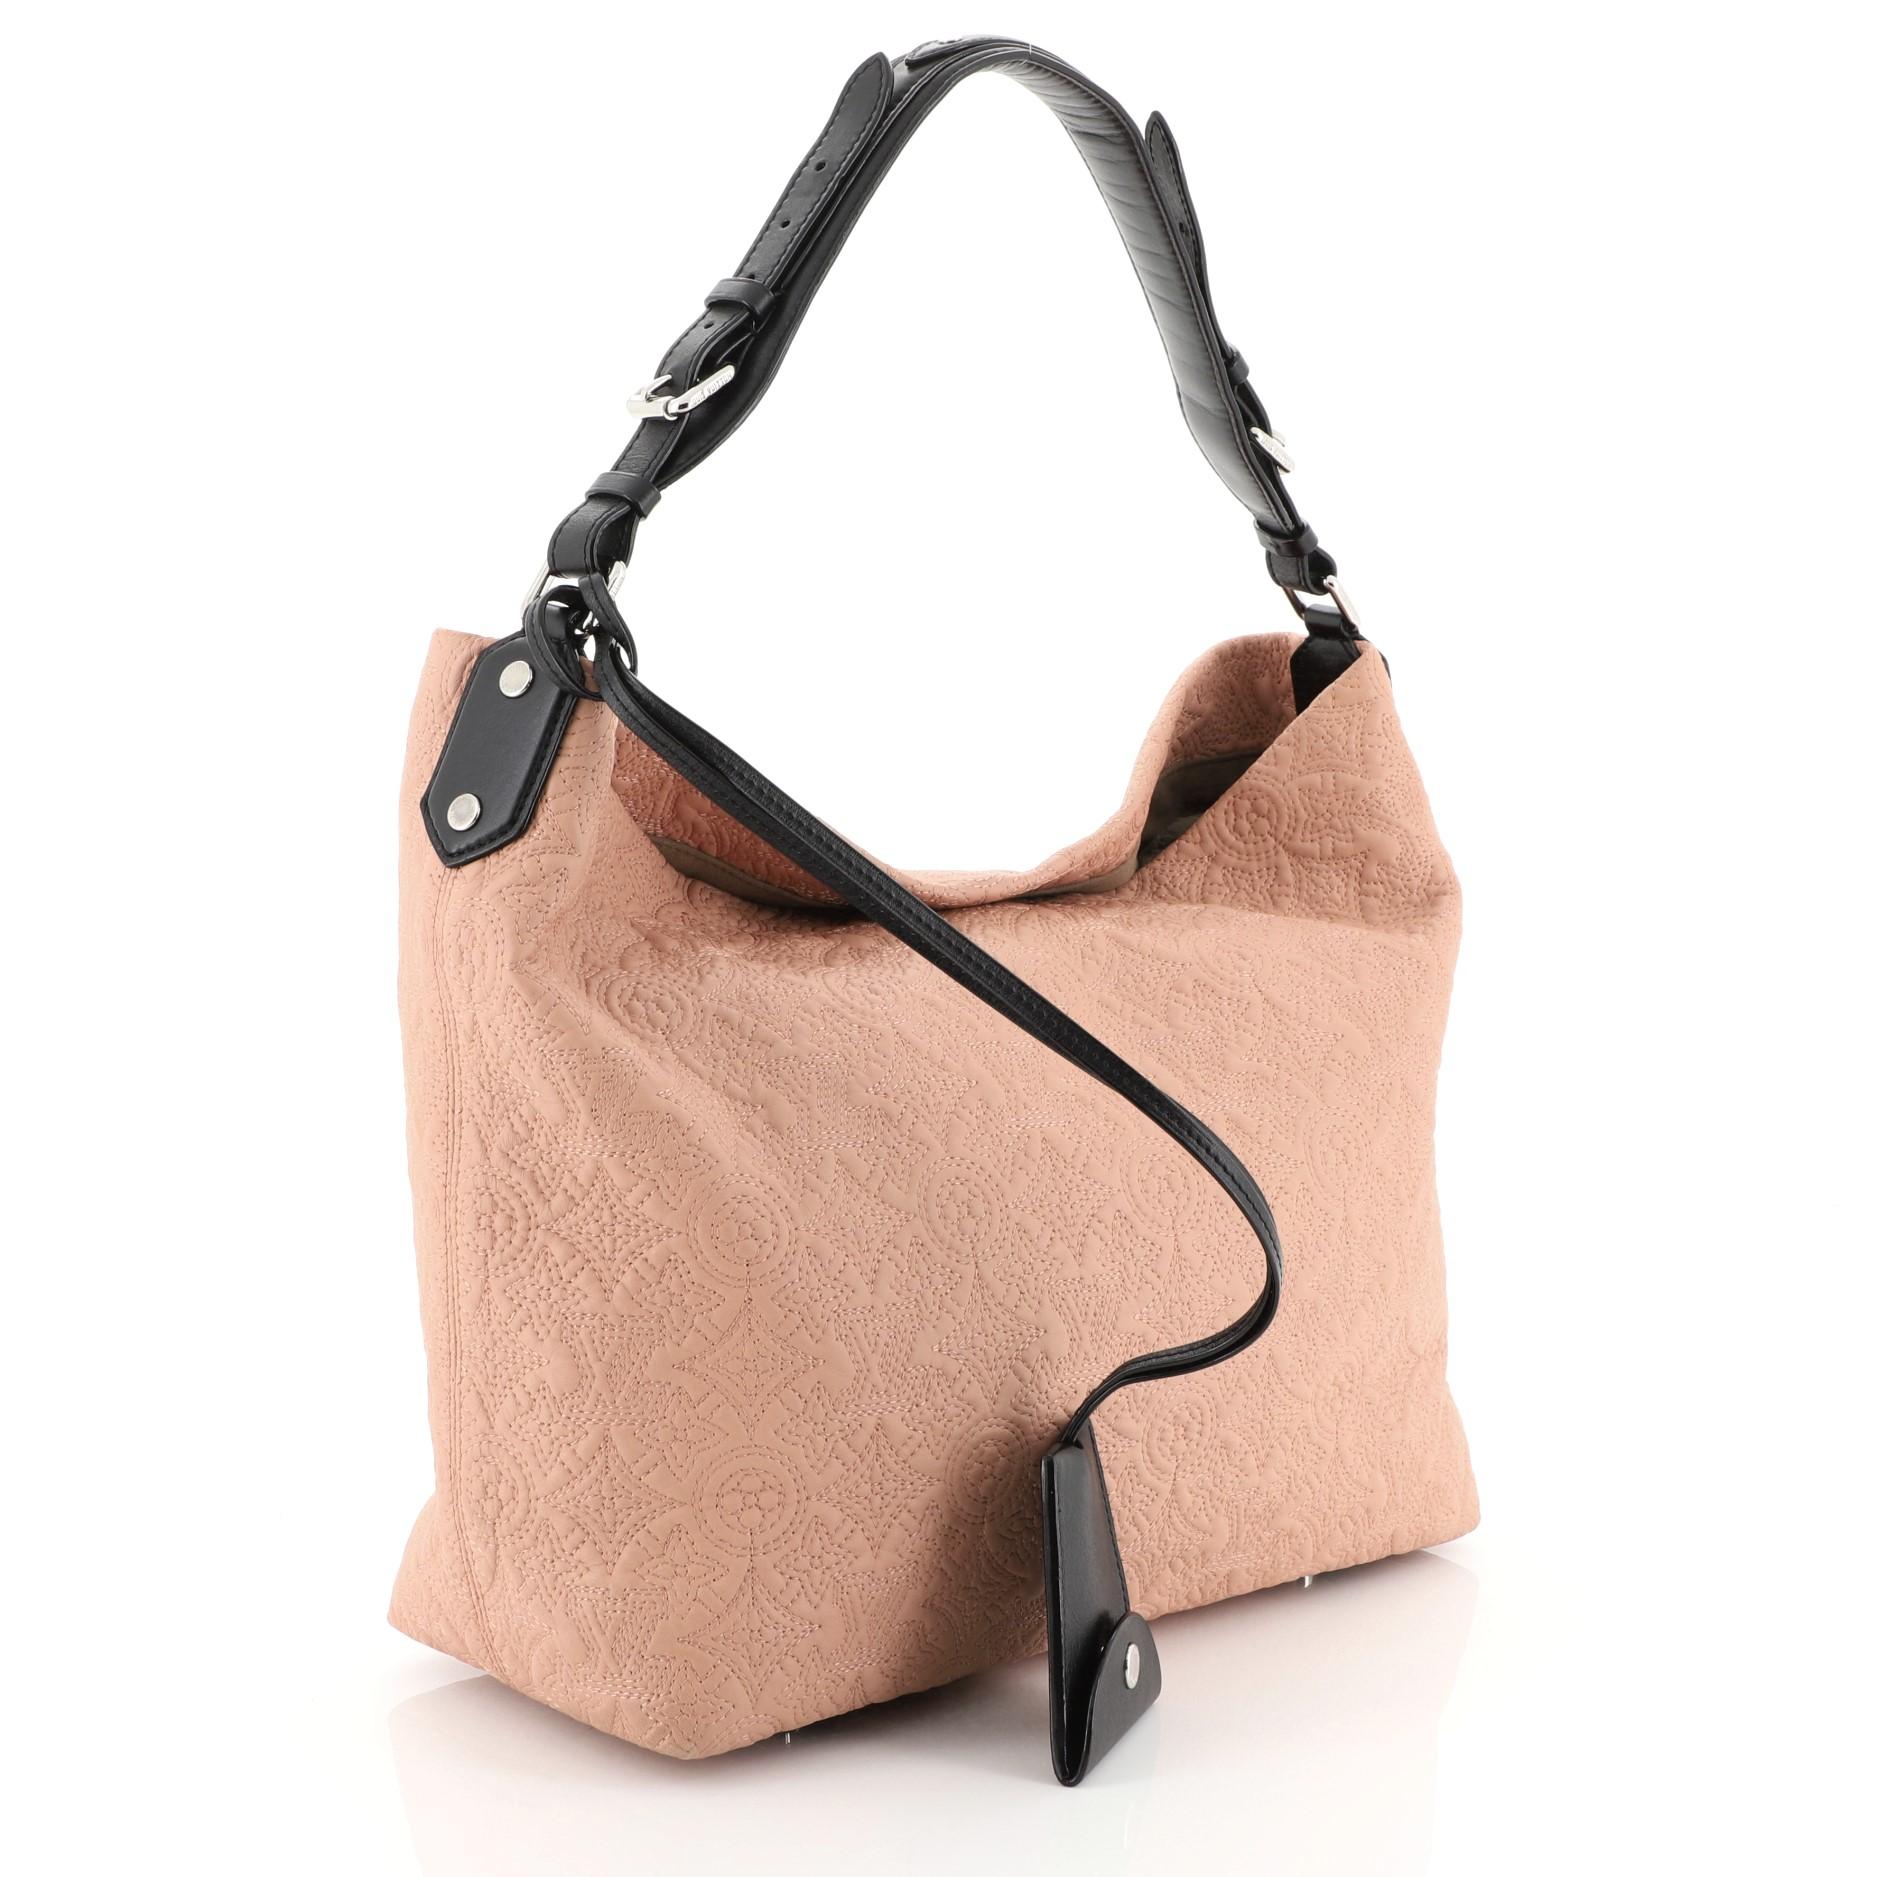 This Louis Vuitton Antheia Hobo Leather PM, crafted from pink leather, features a leather top handle, monogram flower embossed stitching, and silver-tone hardware. It opens to a brown microfiber interior with zip and slip pockets. Authenticity code